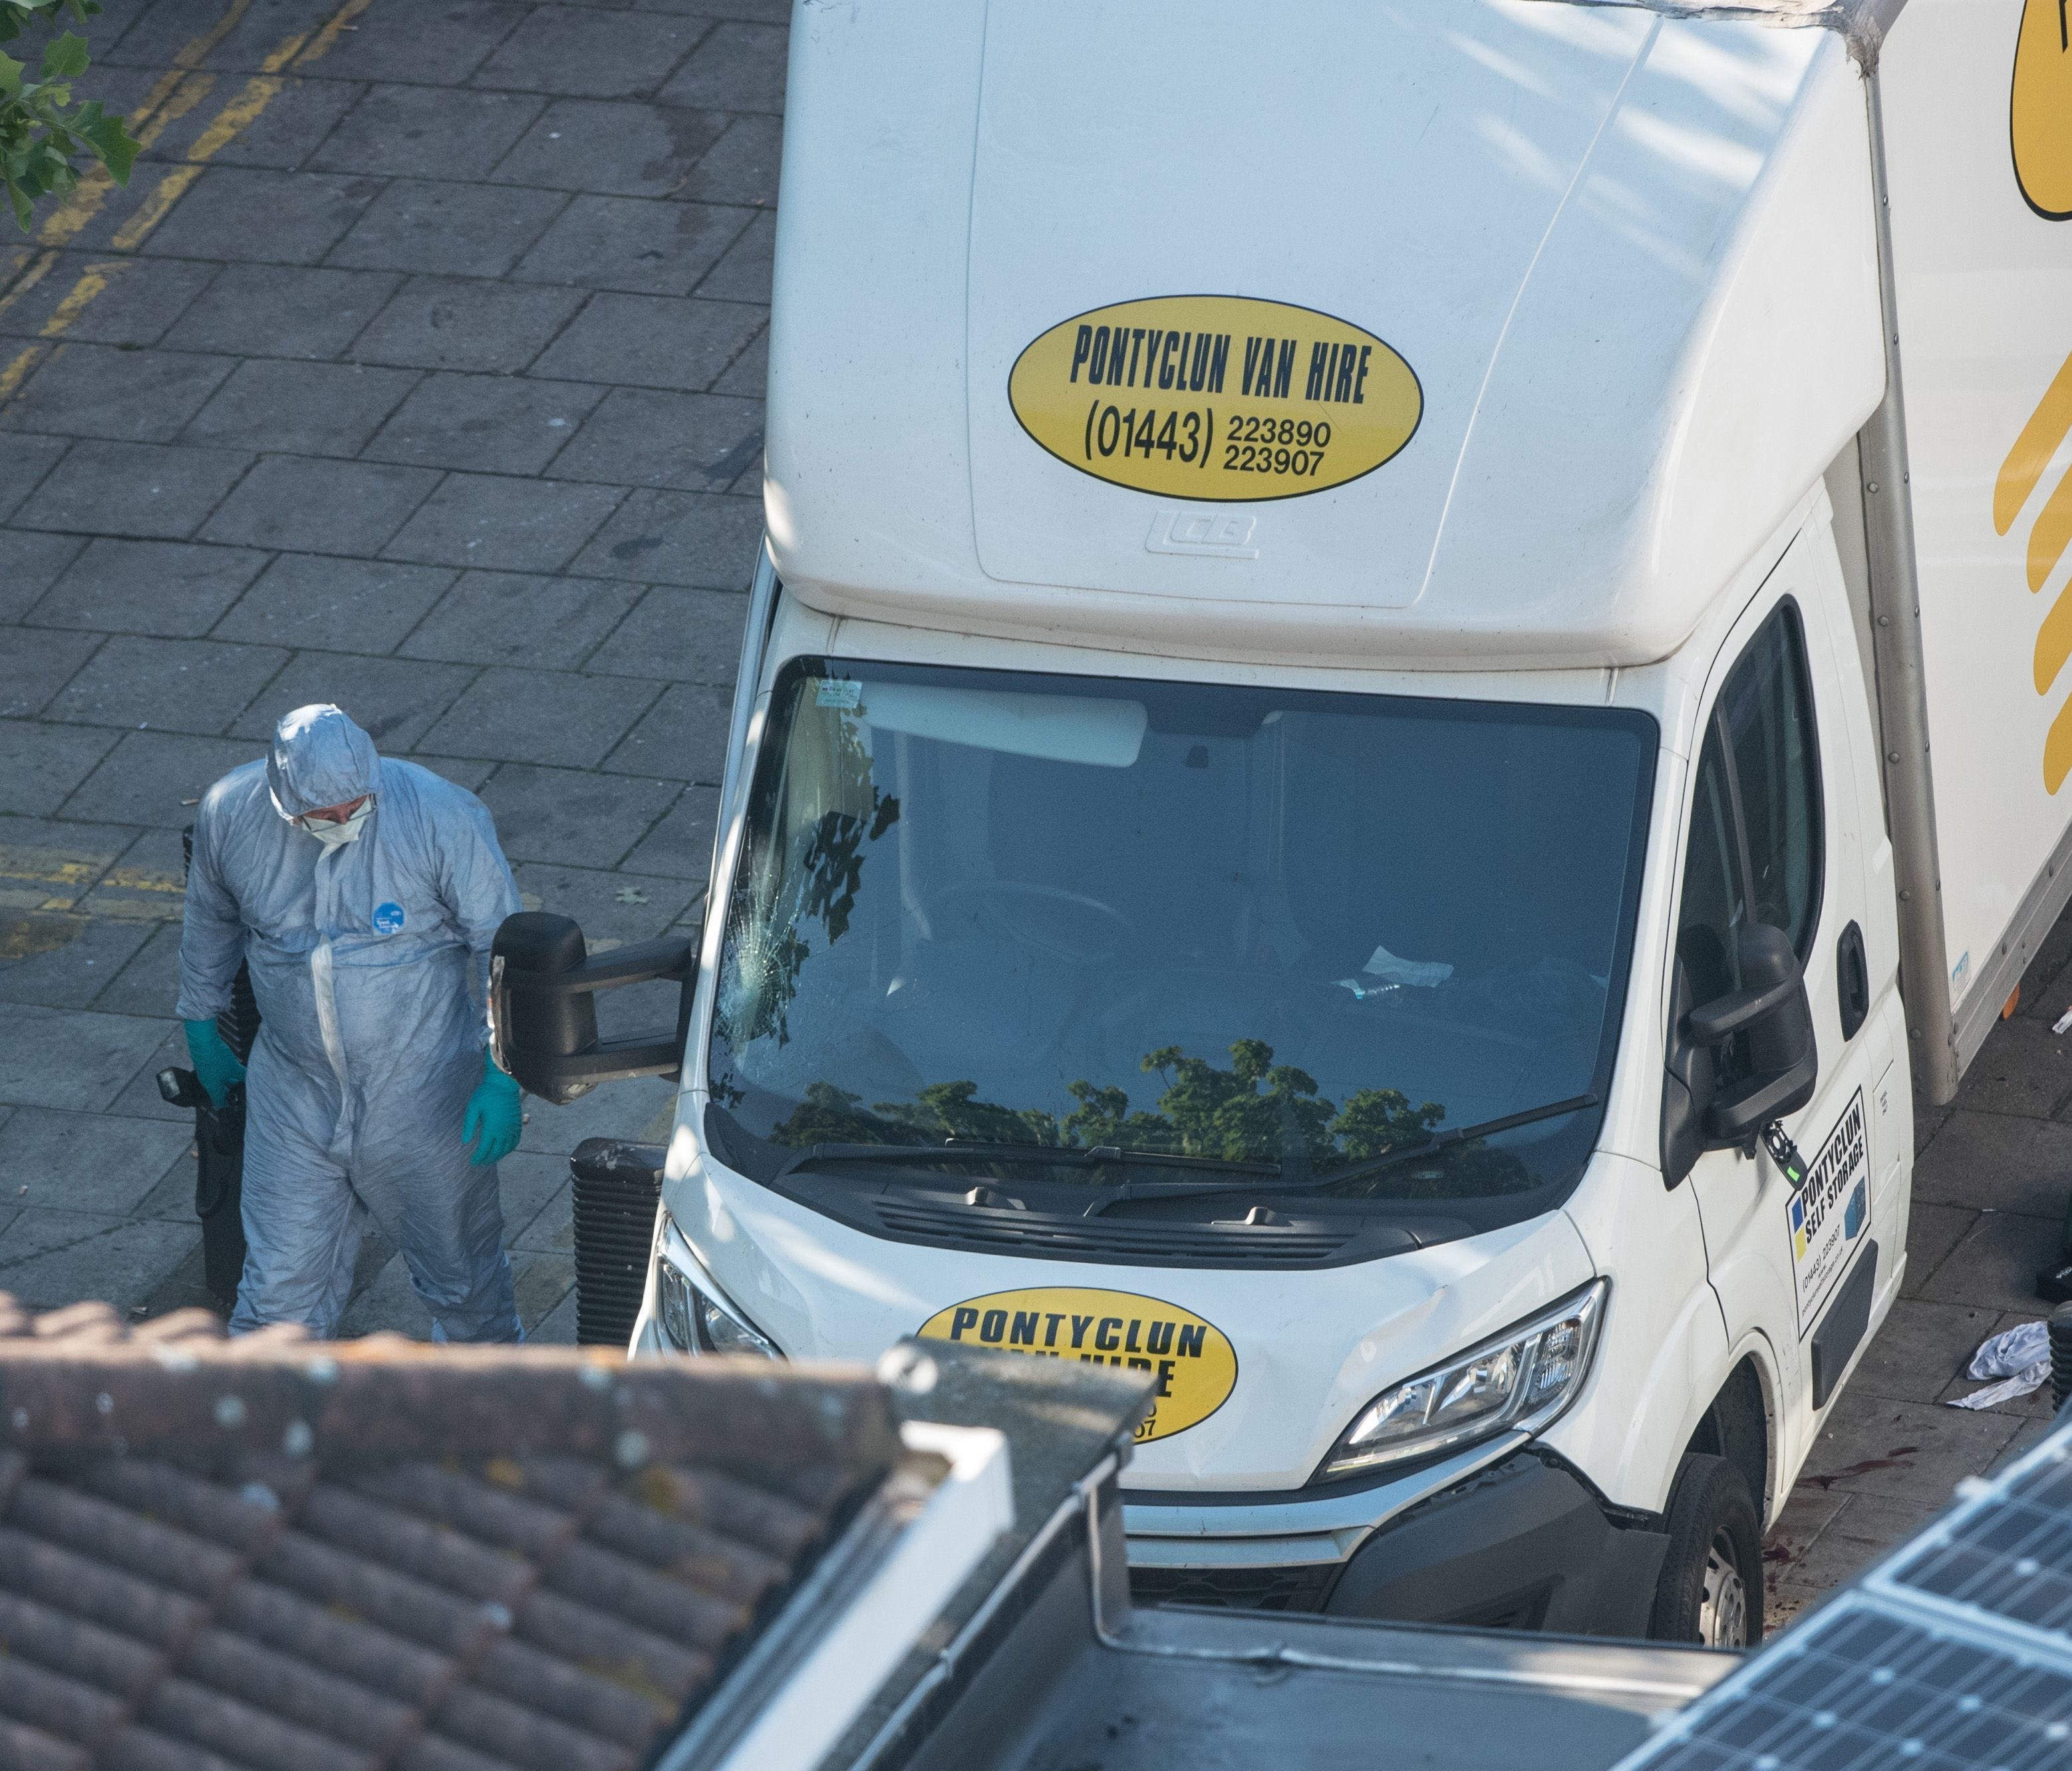 A police forensics officer examines a van believed to be involved in an incident near Finsbury Park Mosque in which one man was killed after a vehicle plowed into pedestrians early Monday.